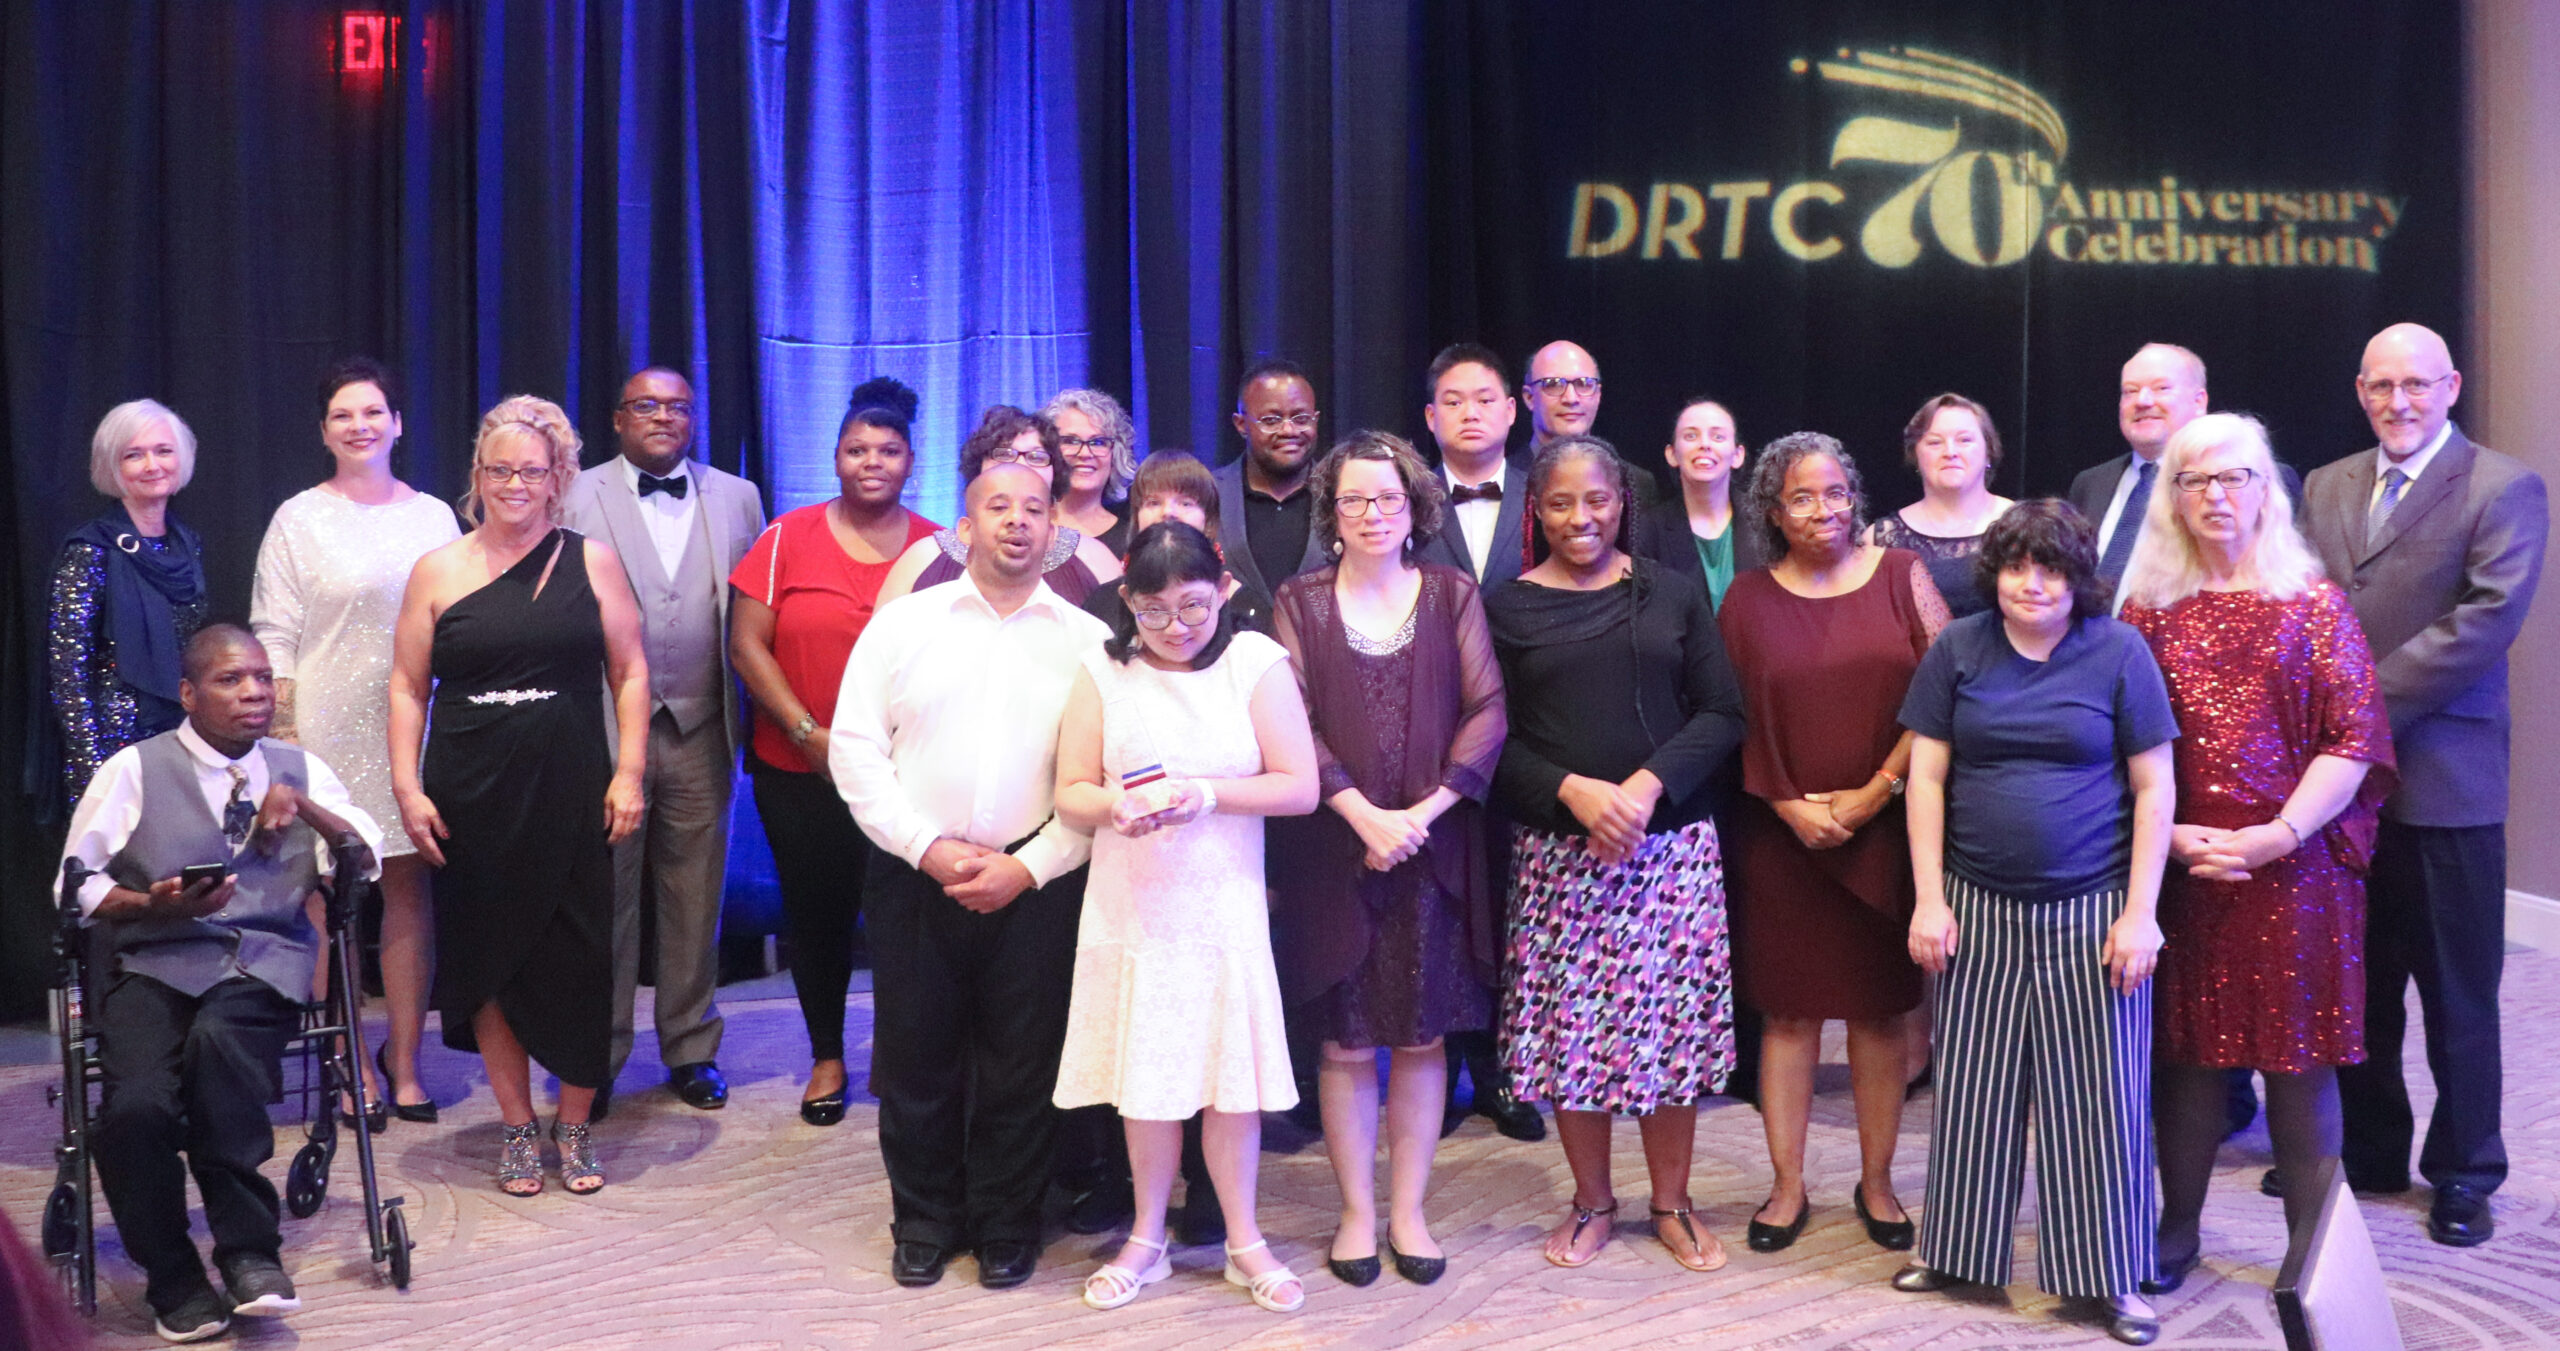 DRTC Marks 70 Years in OKC